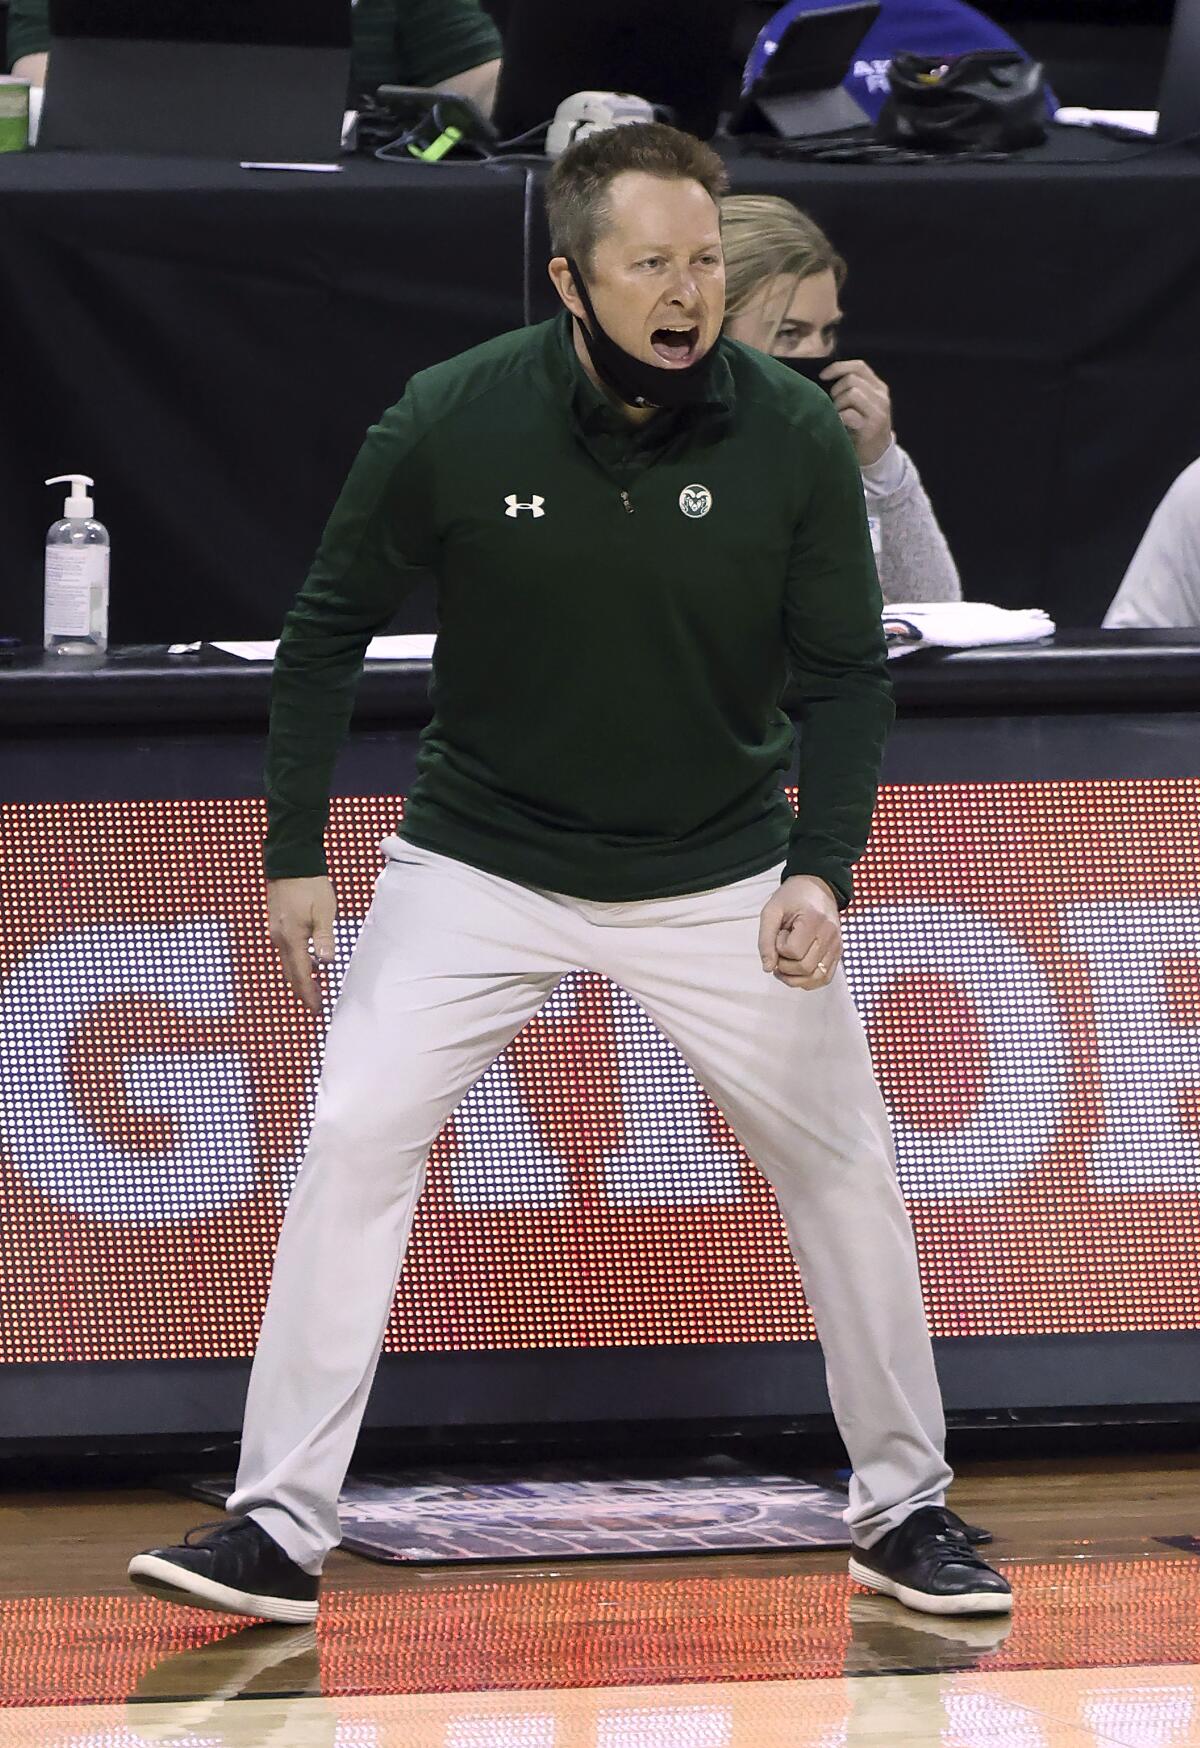 Colorado State head coach Niko Medved instructs his team during the first half of an NCAA college basketball game against Utah State in the semifinal round of the Mountain West Conference men's tournament Friday, March 12, 2021, in Las Vegas. (AP Photo/Isaac Brekken)